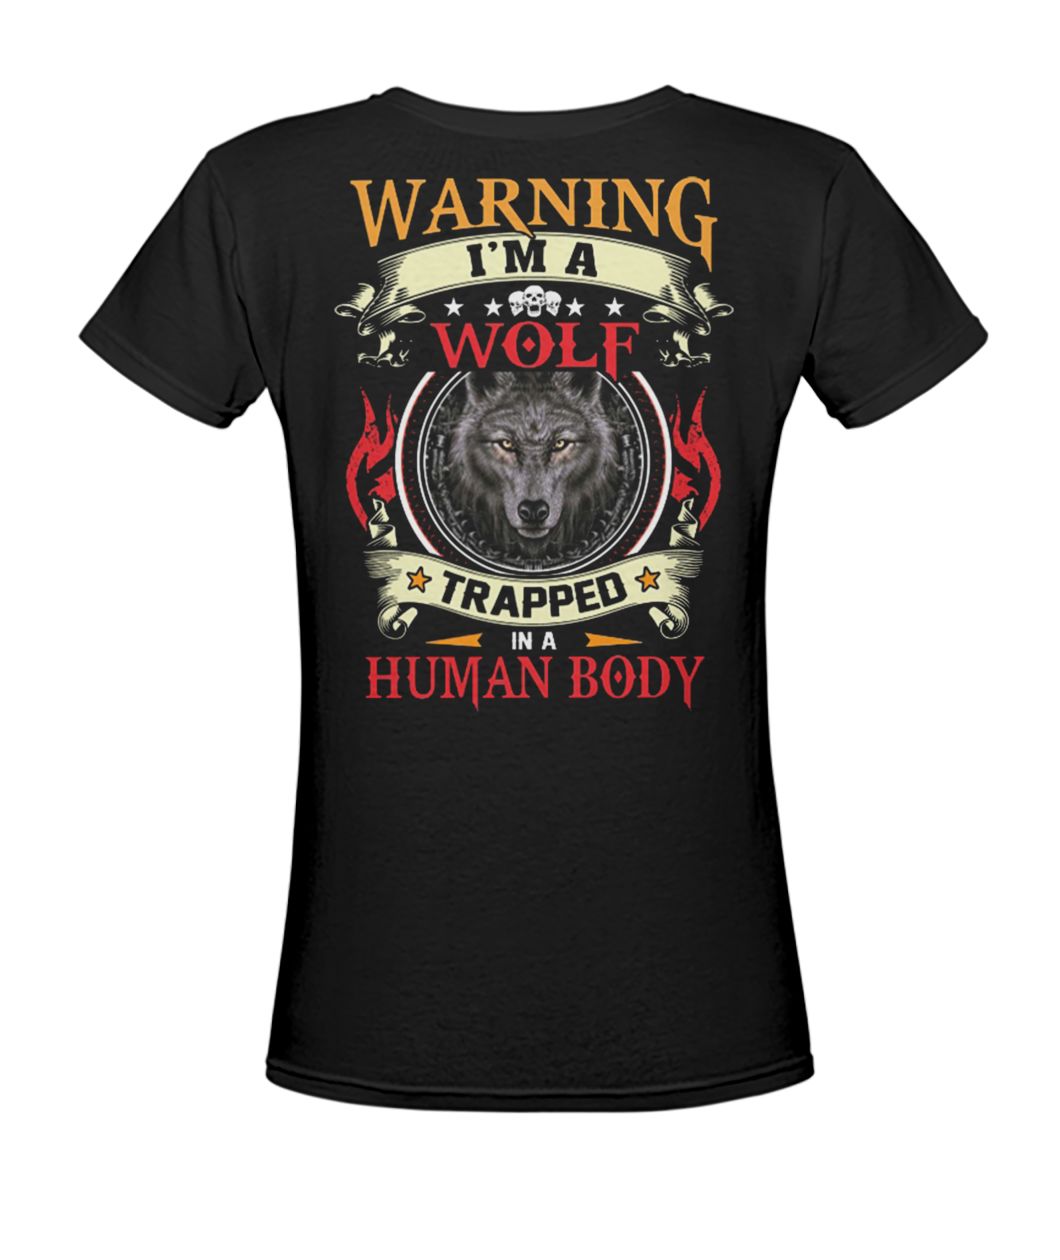 Warning I'm a wolf trapped in a human body women's v-neck